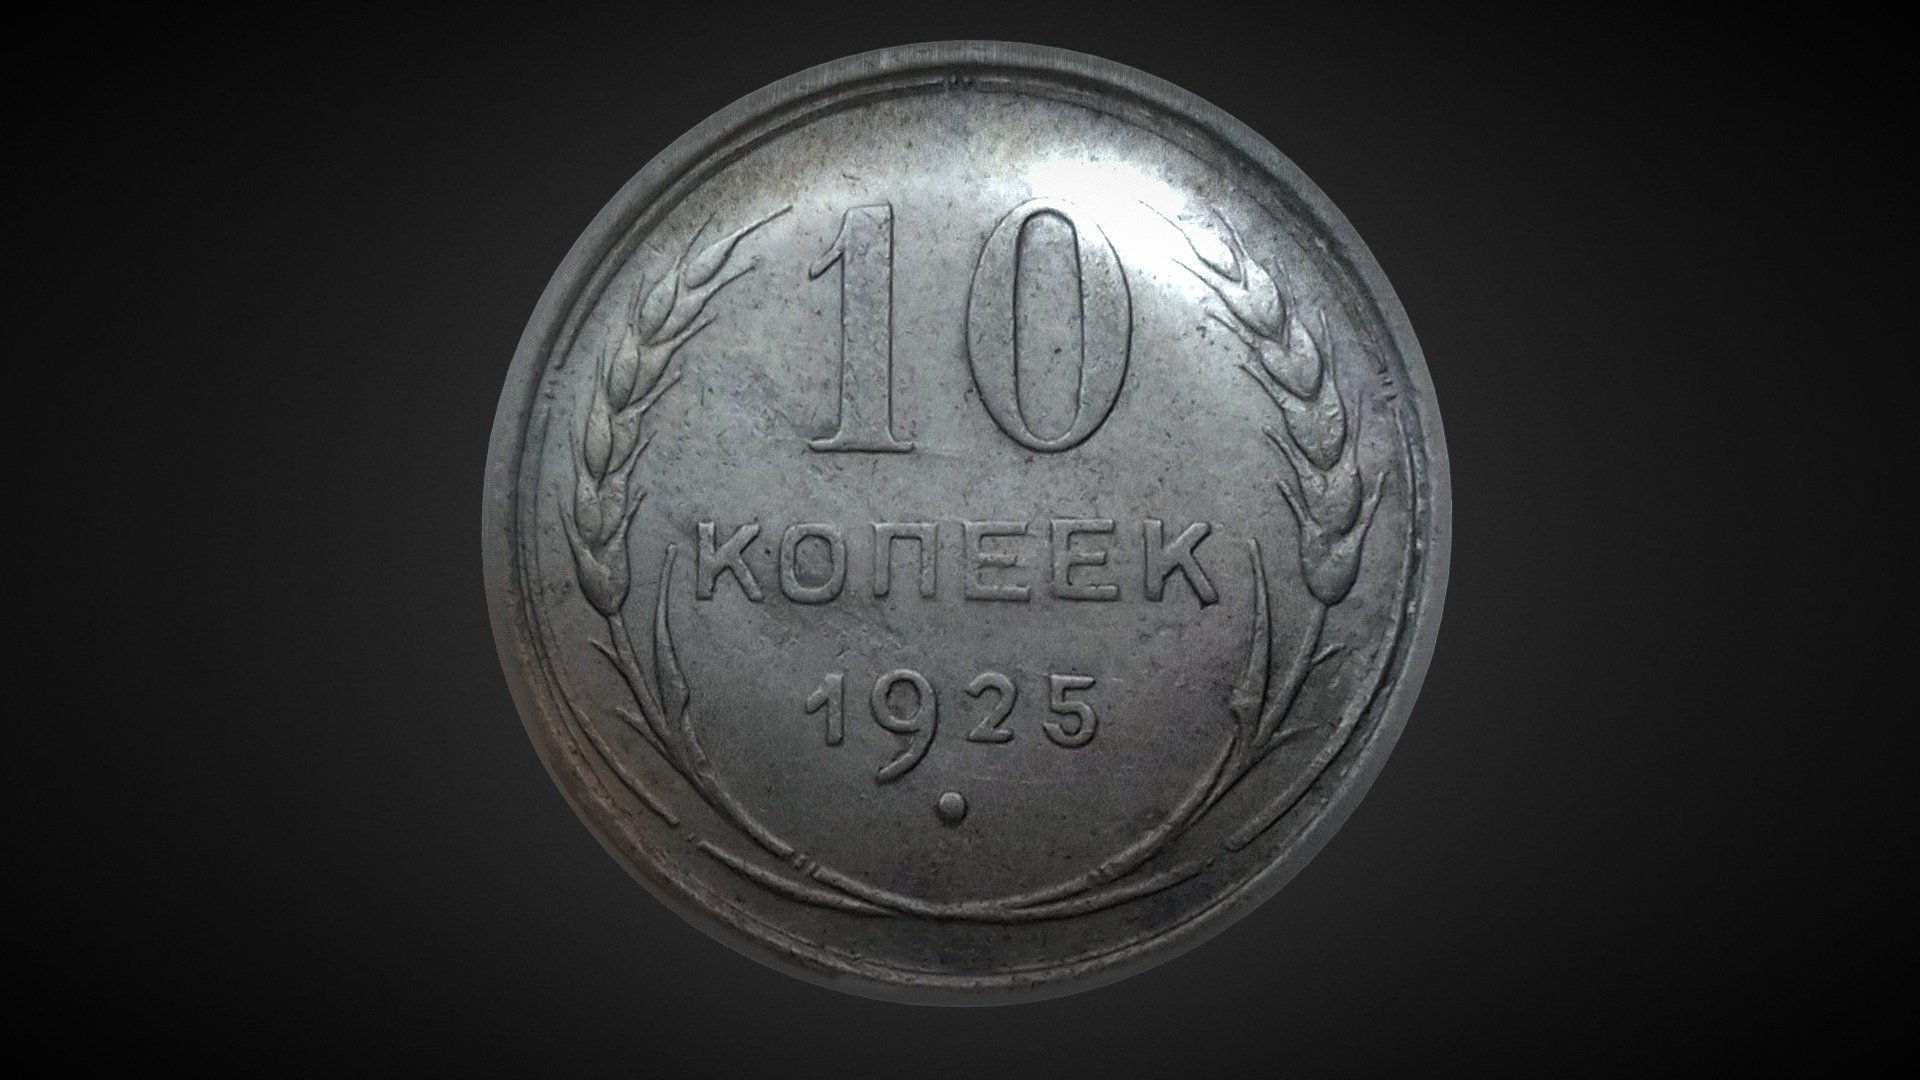 Coin of the Soviet Union (1925).